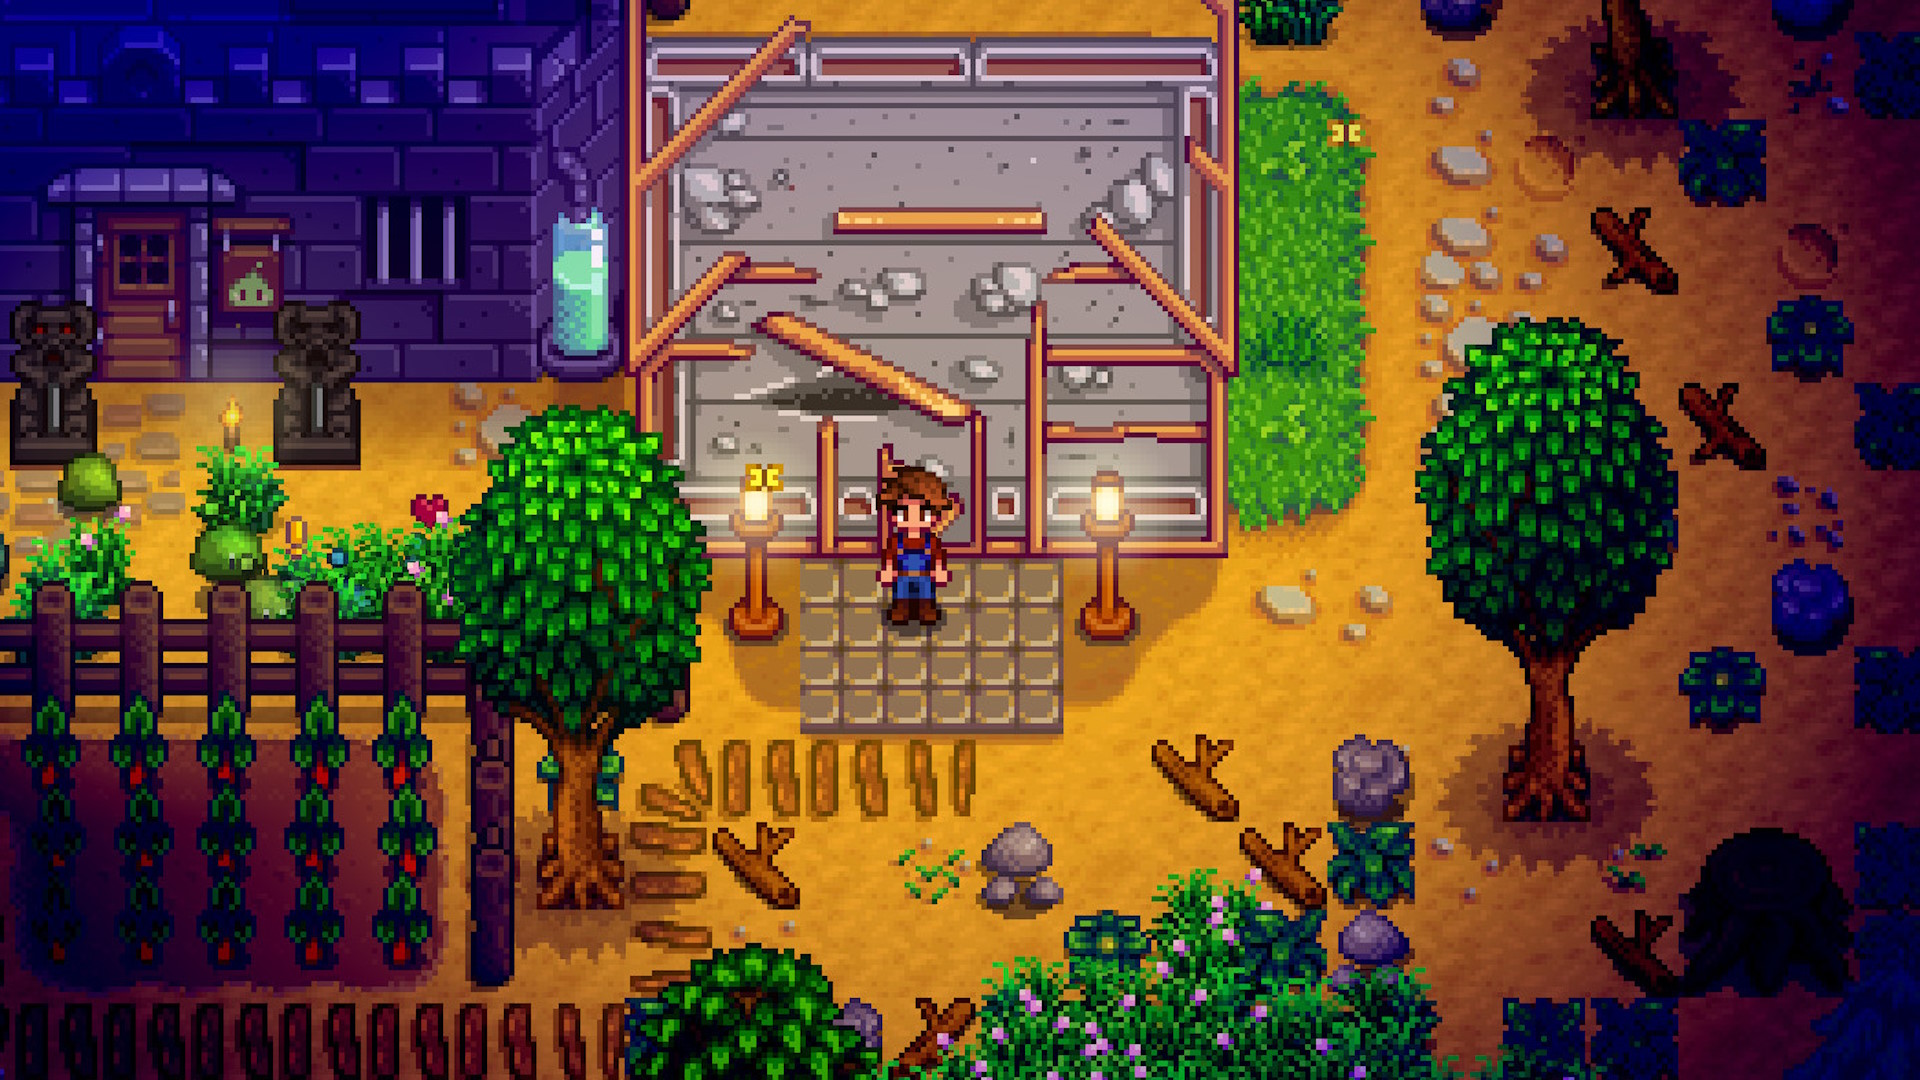 Stardew Valley’s 1.6 update is finally live, and Eric Barone wasn’t kidding: it is massive